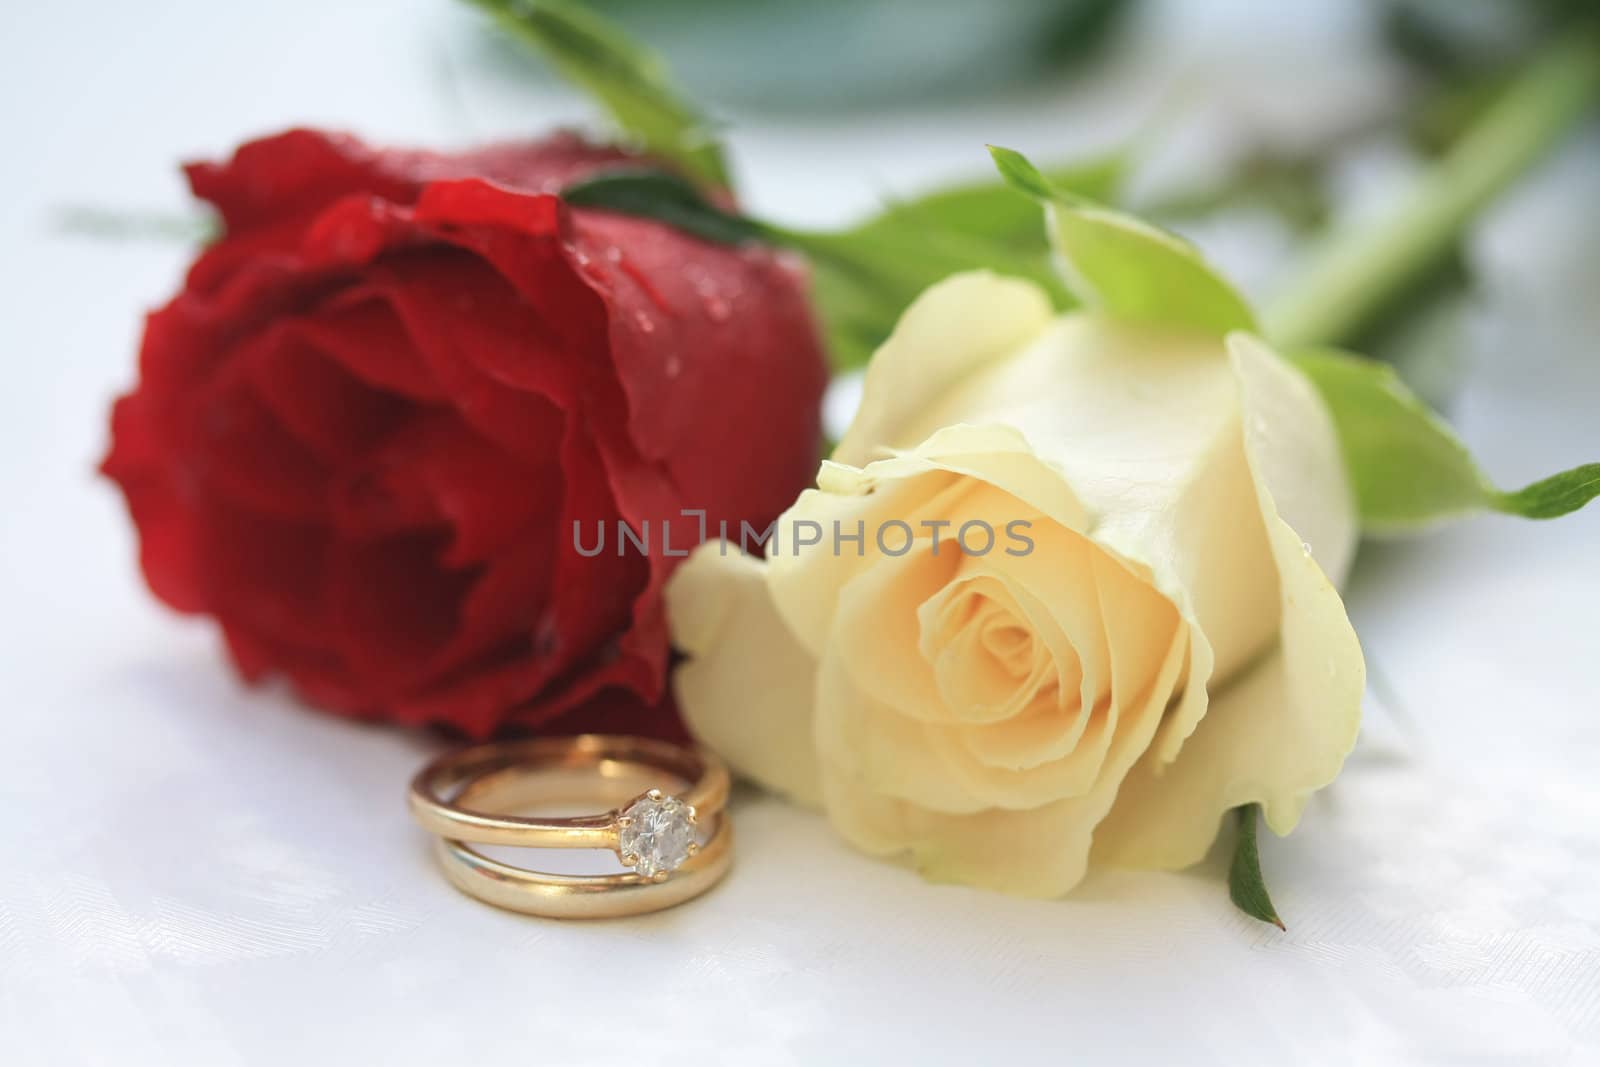 A wedding band and a diamond solitaire engagement ring with two roses on the background, a red one and a white one